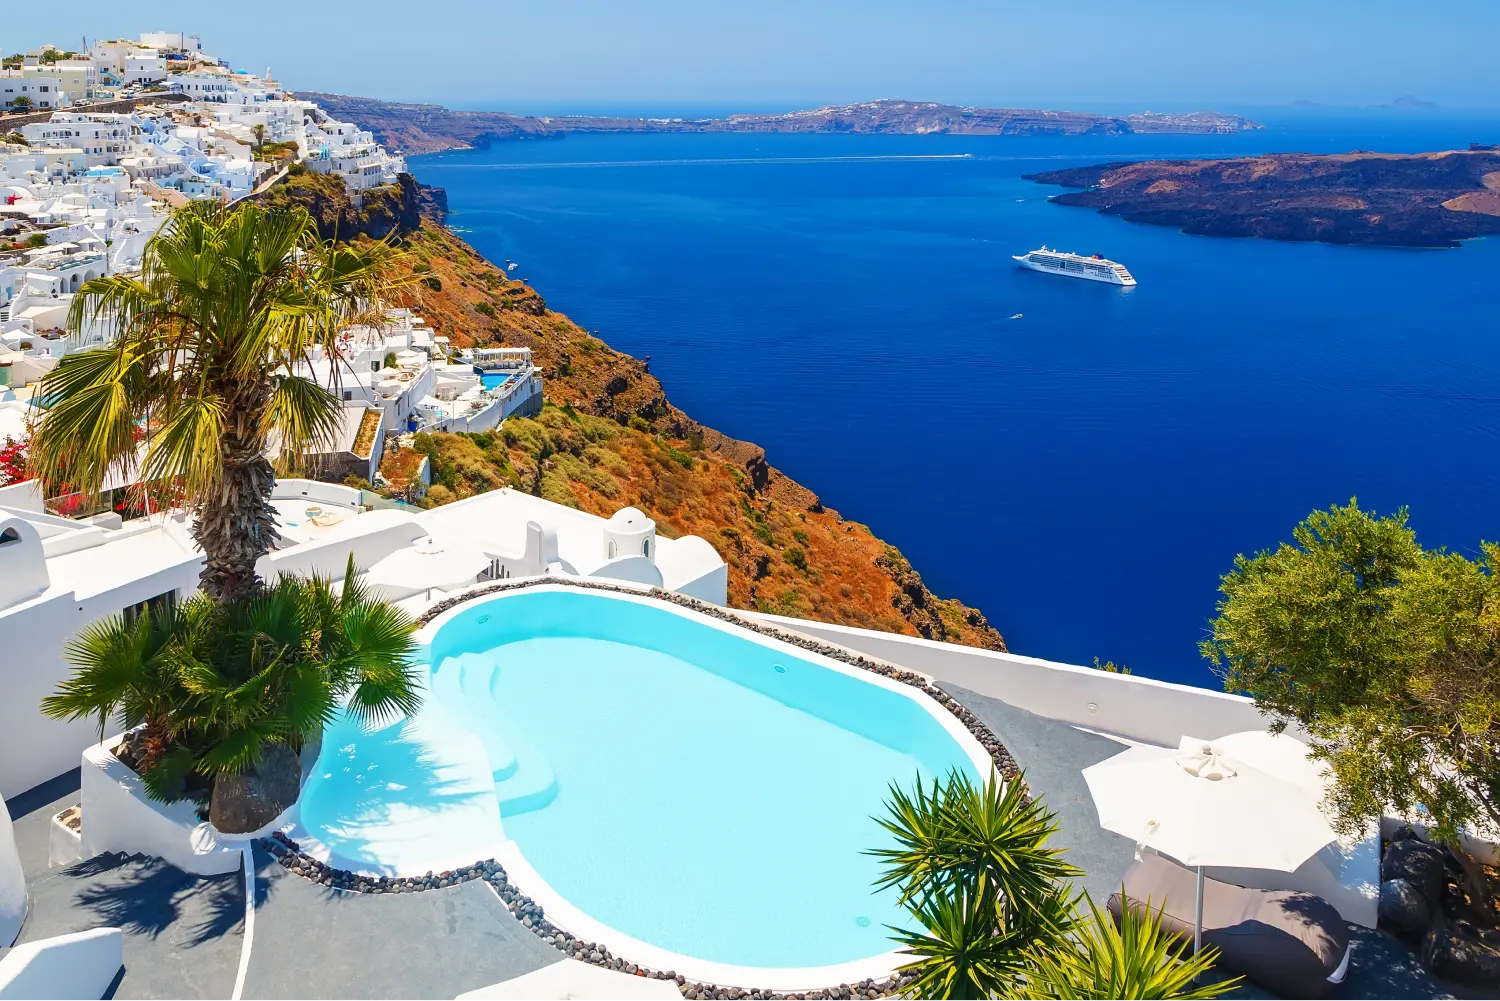 Stunning view of the caldera from a luxurious hotel with pool in Santorini